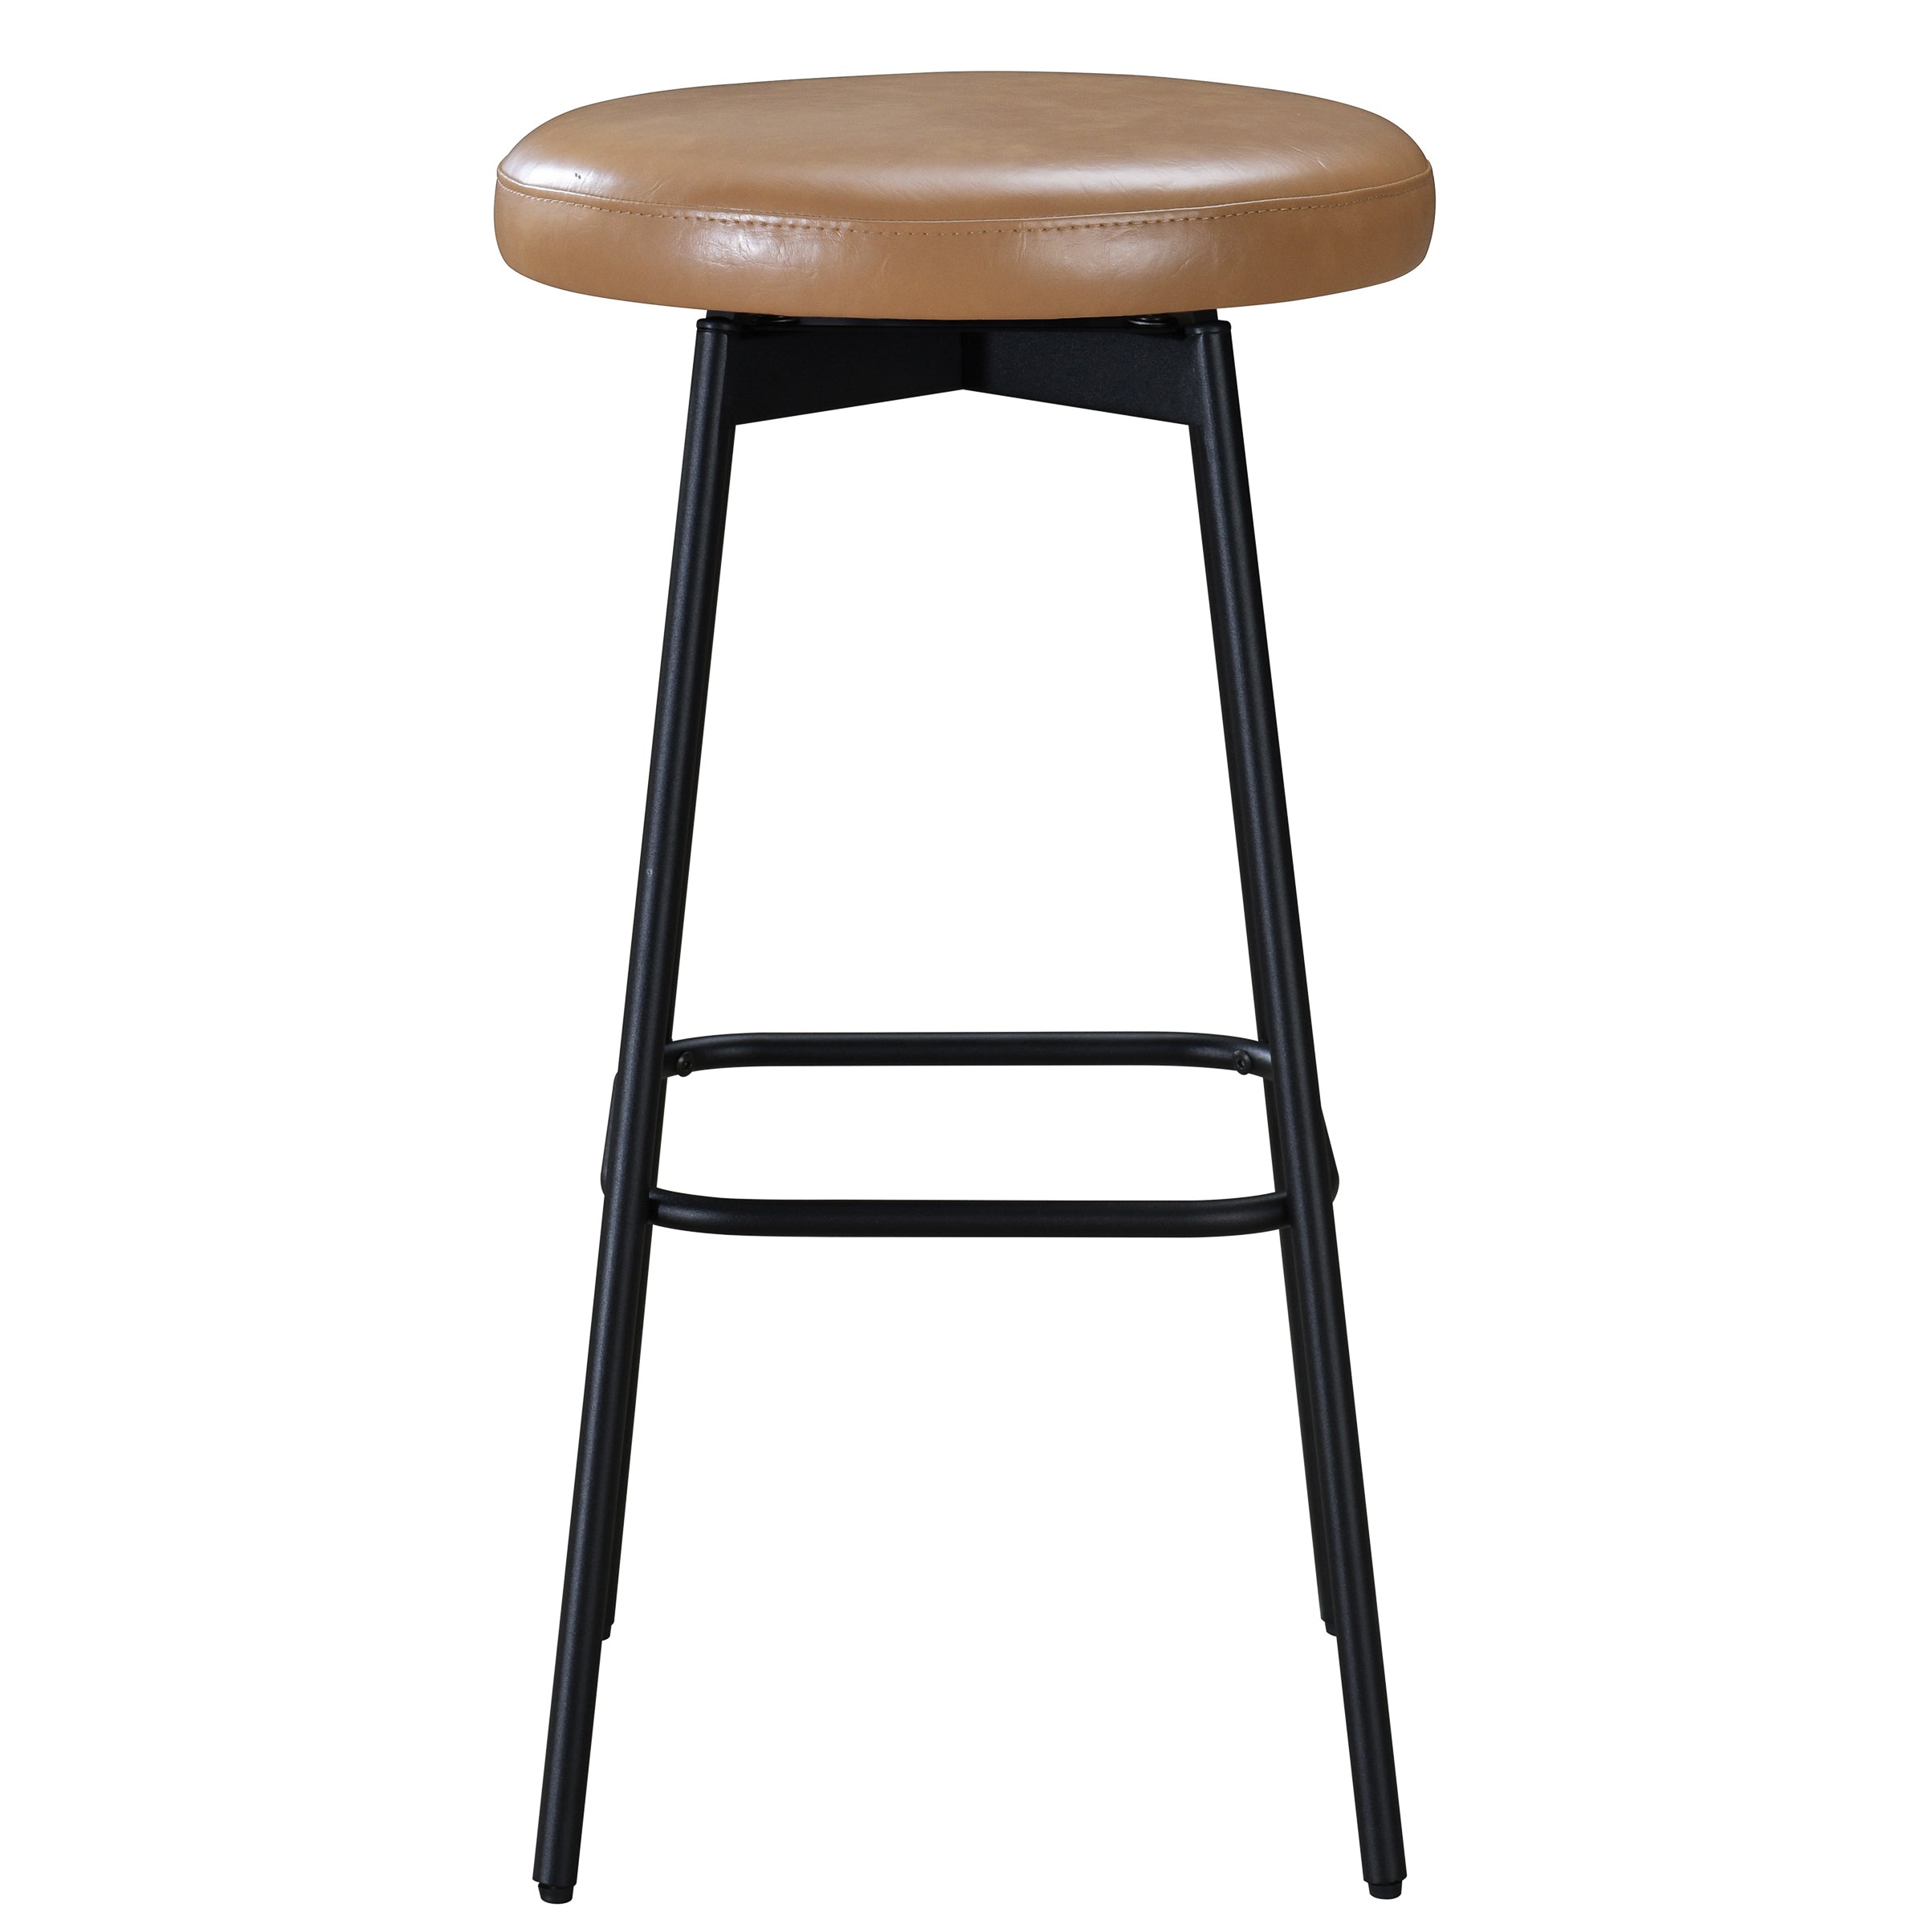 Doheny Swivel Barstool - Black Steel Legs With Upholstered Seat